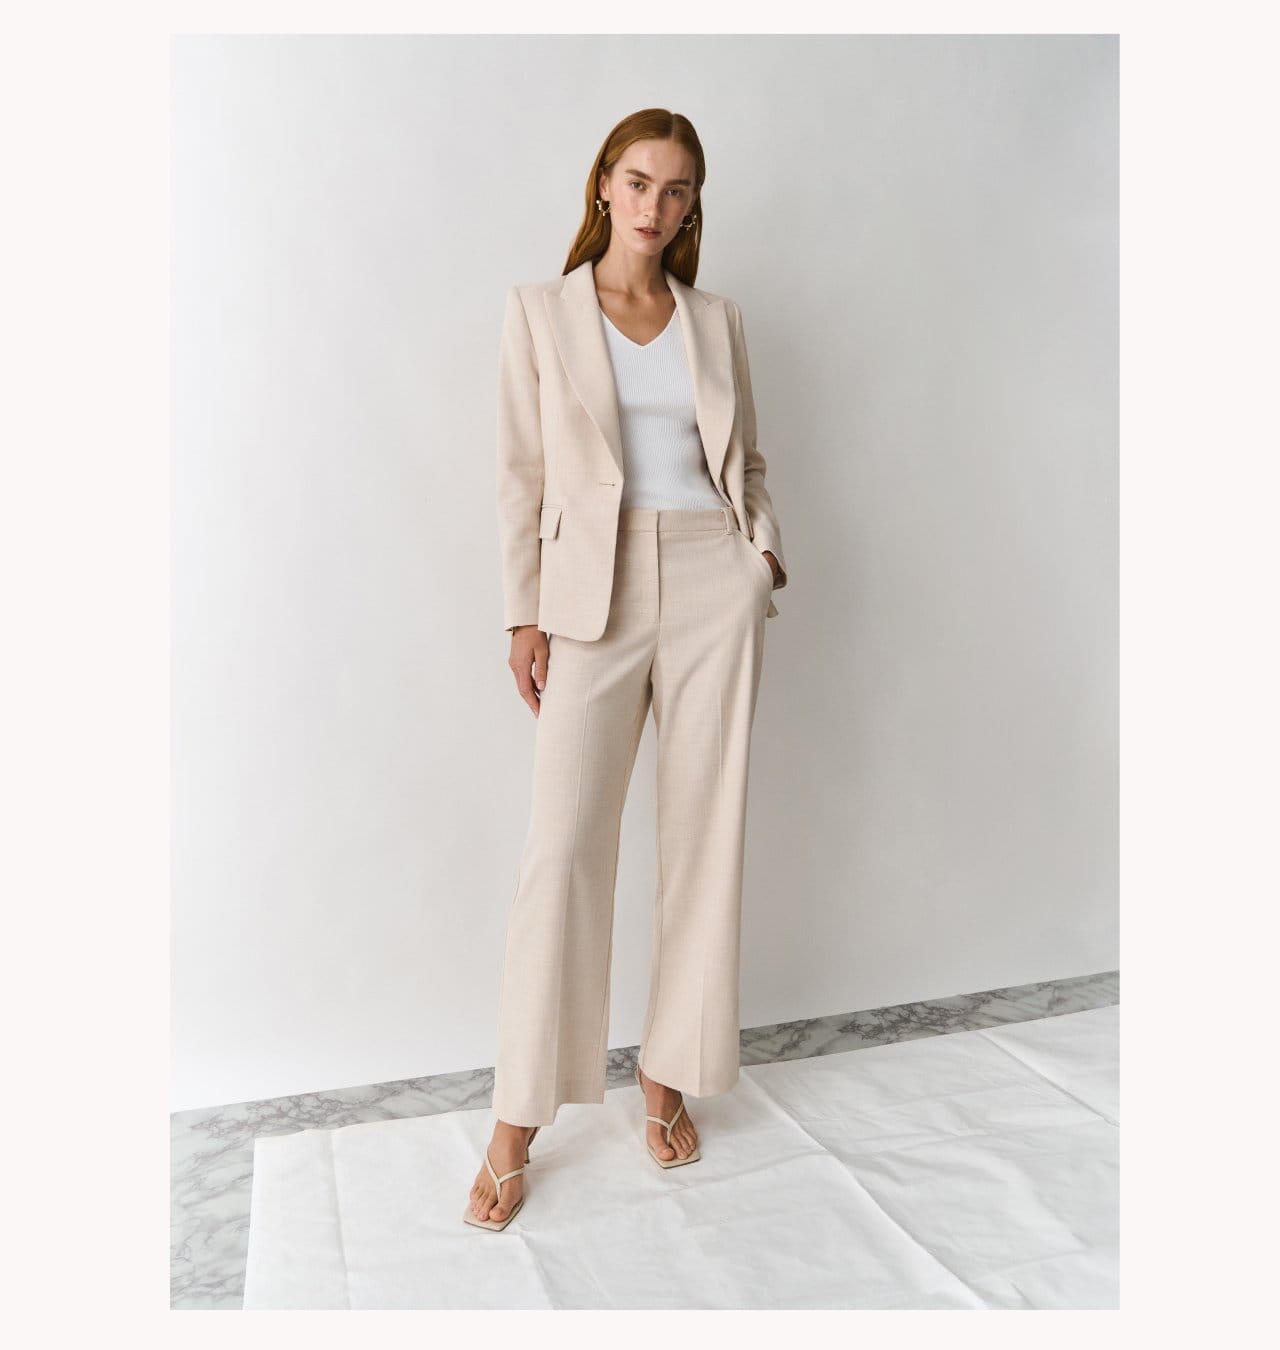 New Arrivals - Tailoring